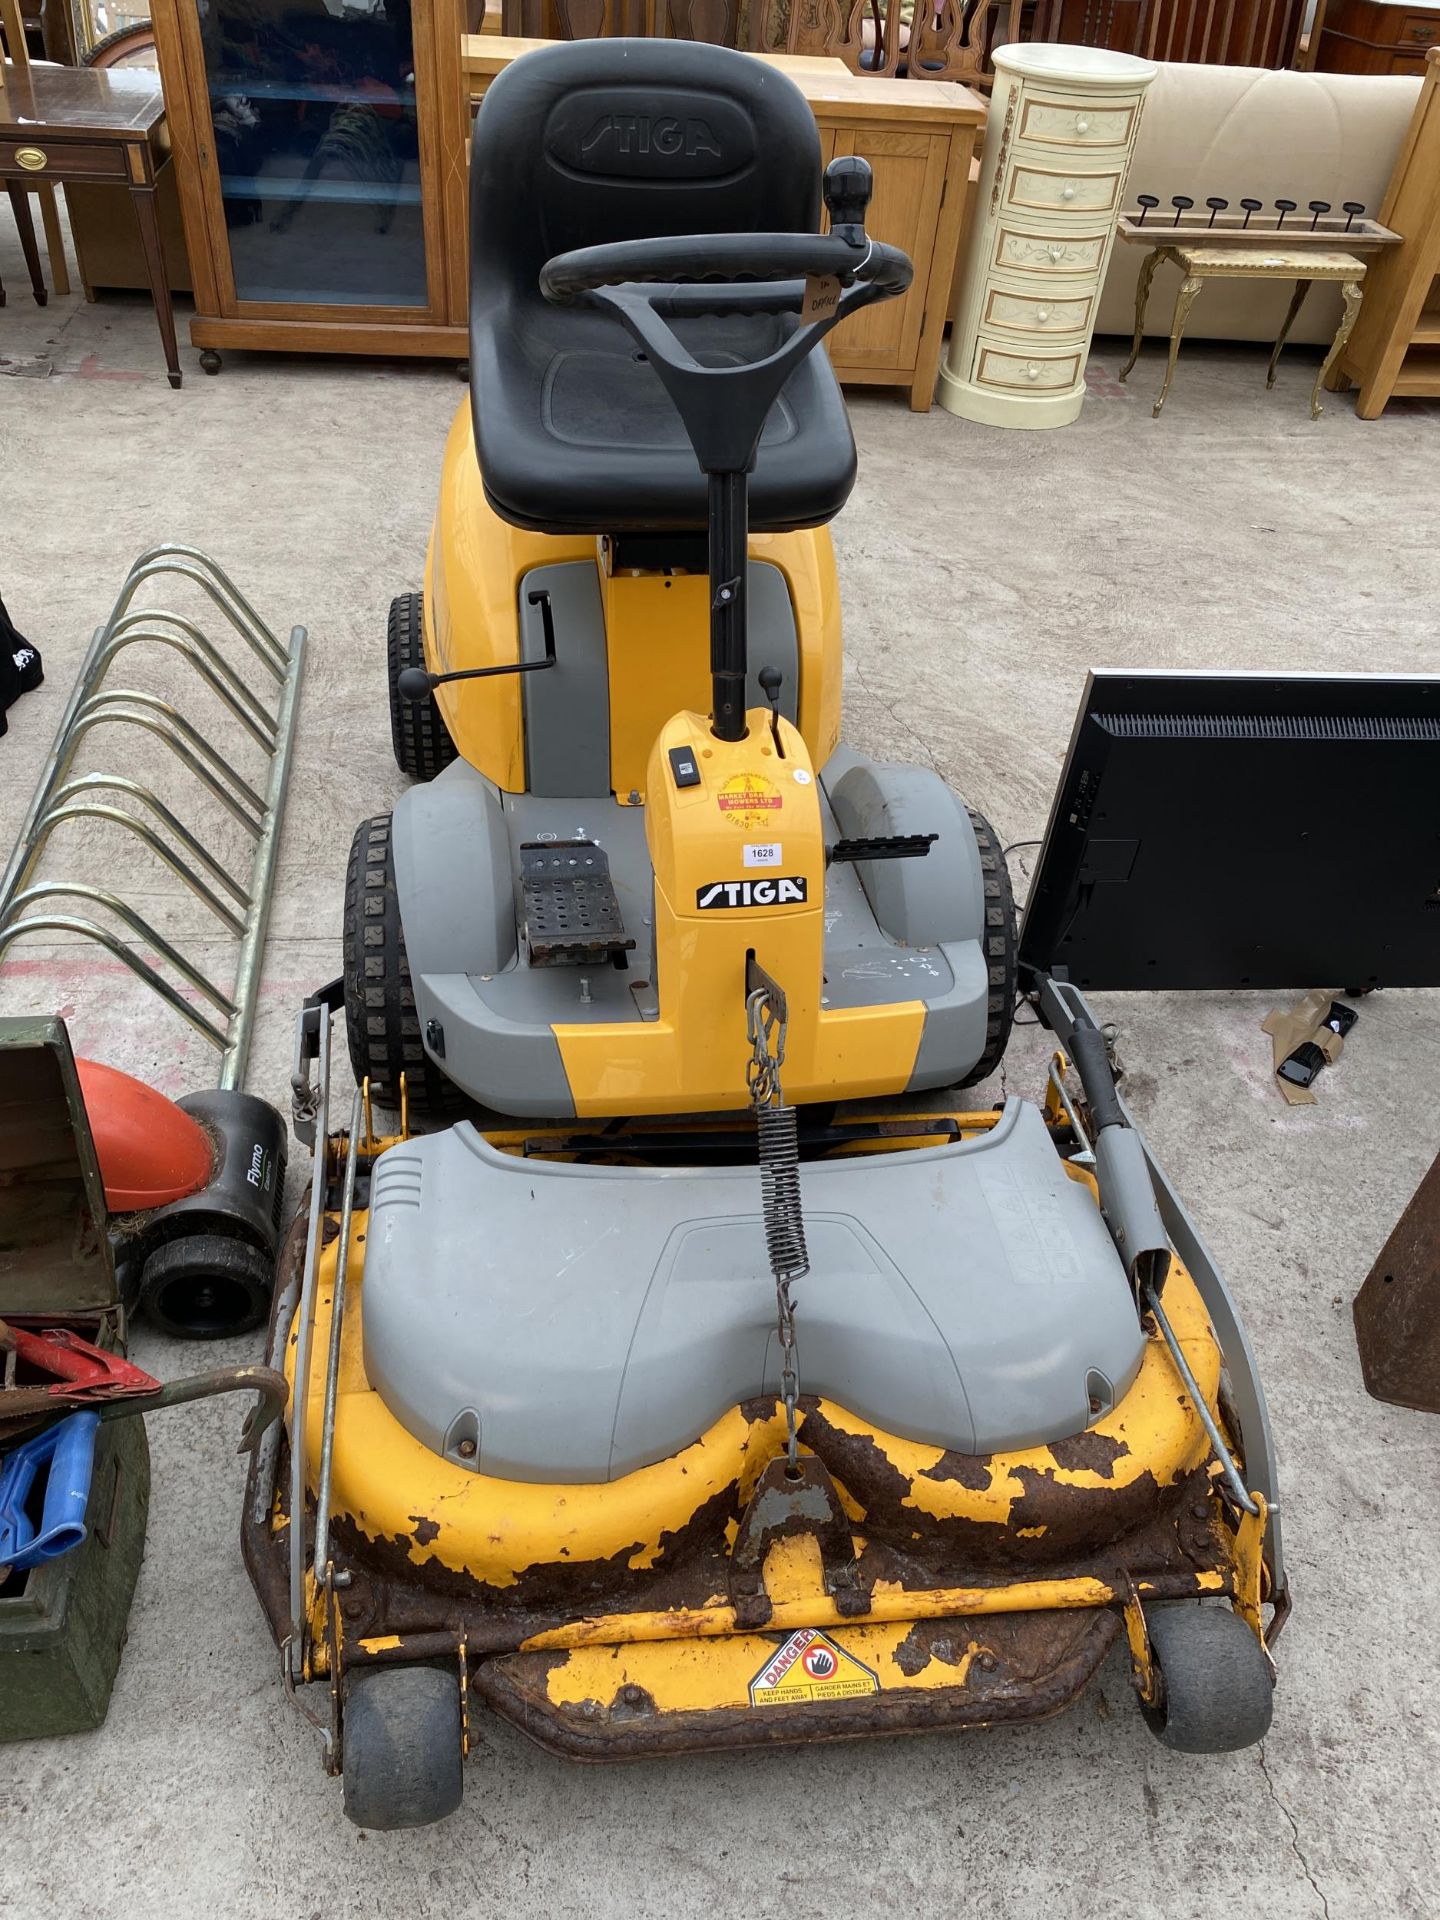 A STIGA RIDE ON LAWN MOWER WITH FRONT DECK AND KEY IN THE OFFICE